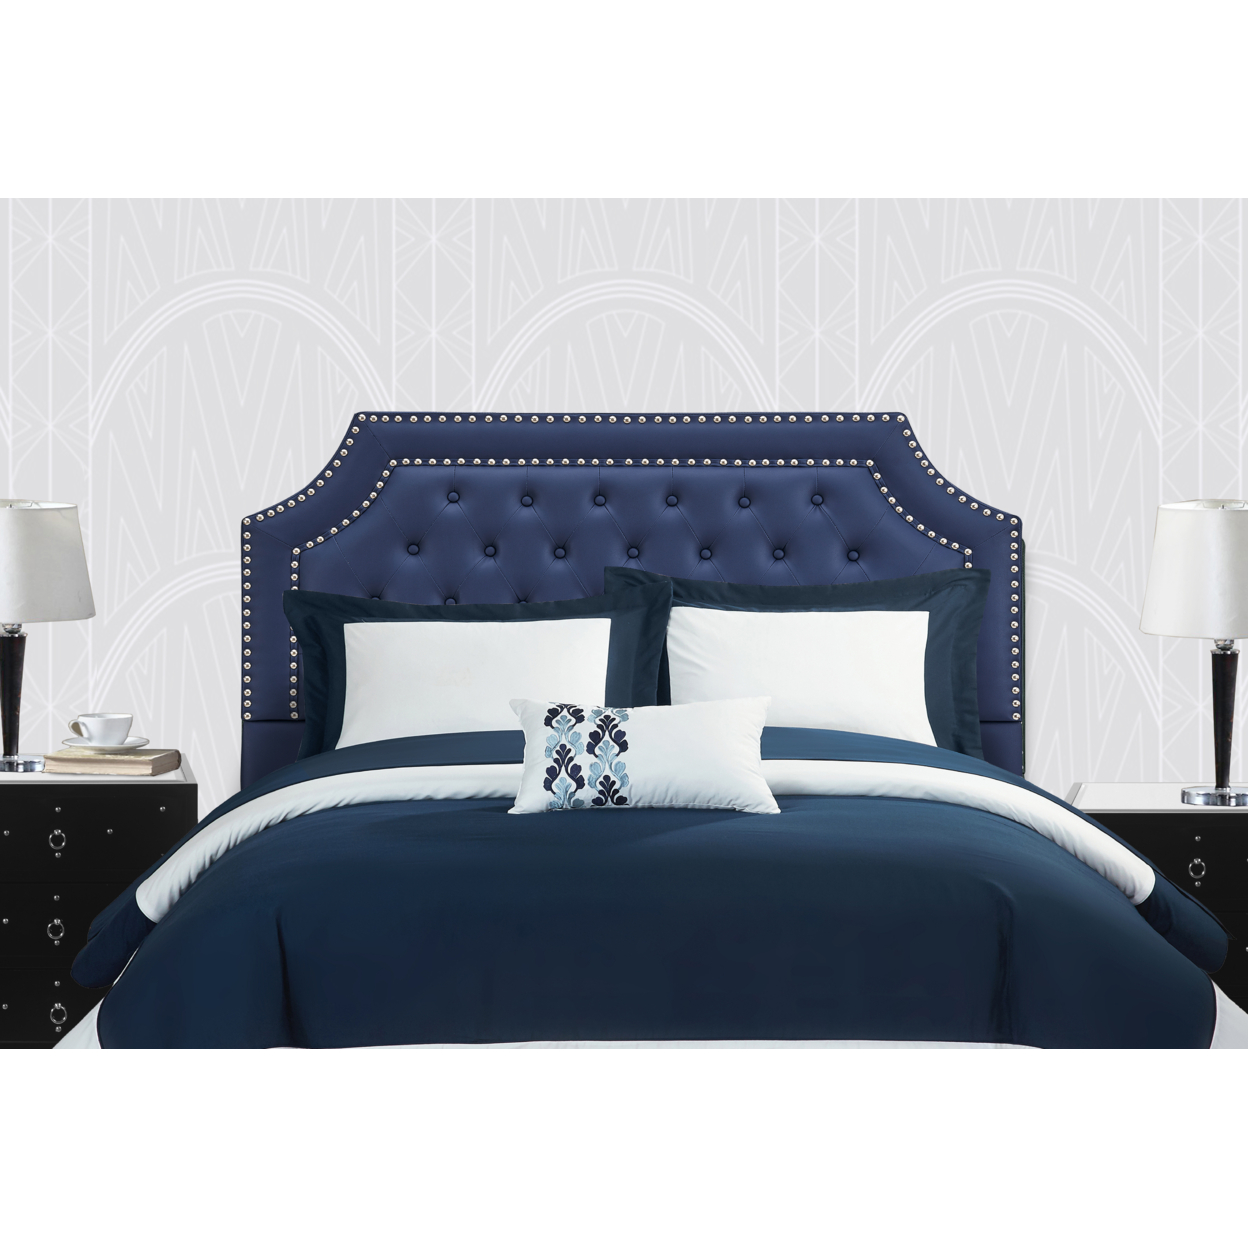 Chic Home Mahlon Headboard PU Leather Upholstered Button Tufted Double Row Silver Nailhead Trim - Navy, Twin